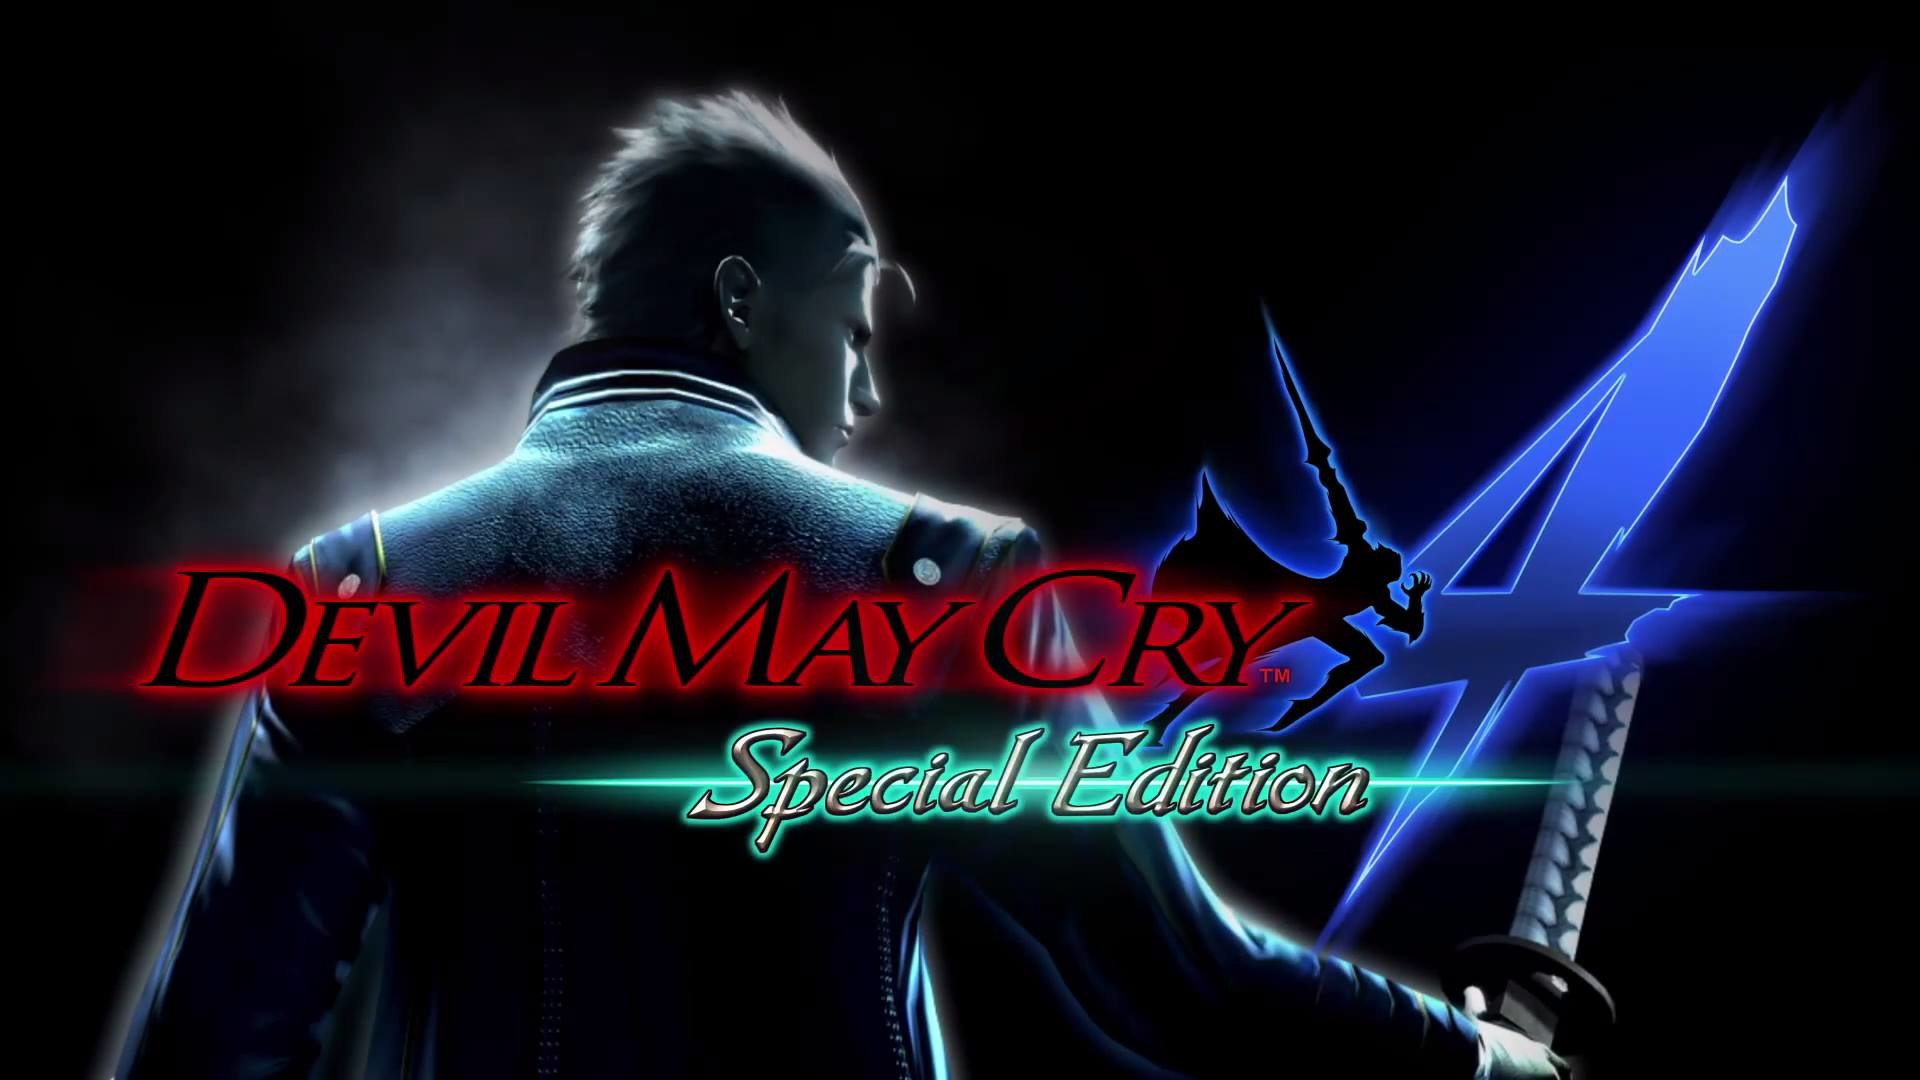 1920x1080 DMC4 Special Edition Confirmed For PS4 (w/Vergil)